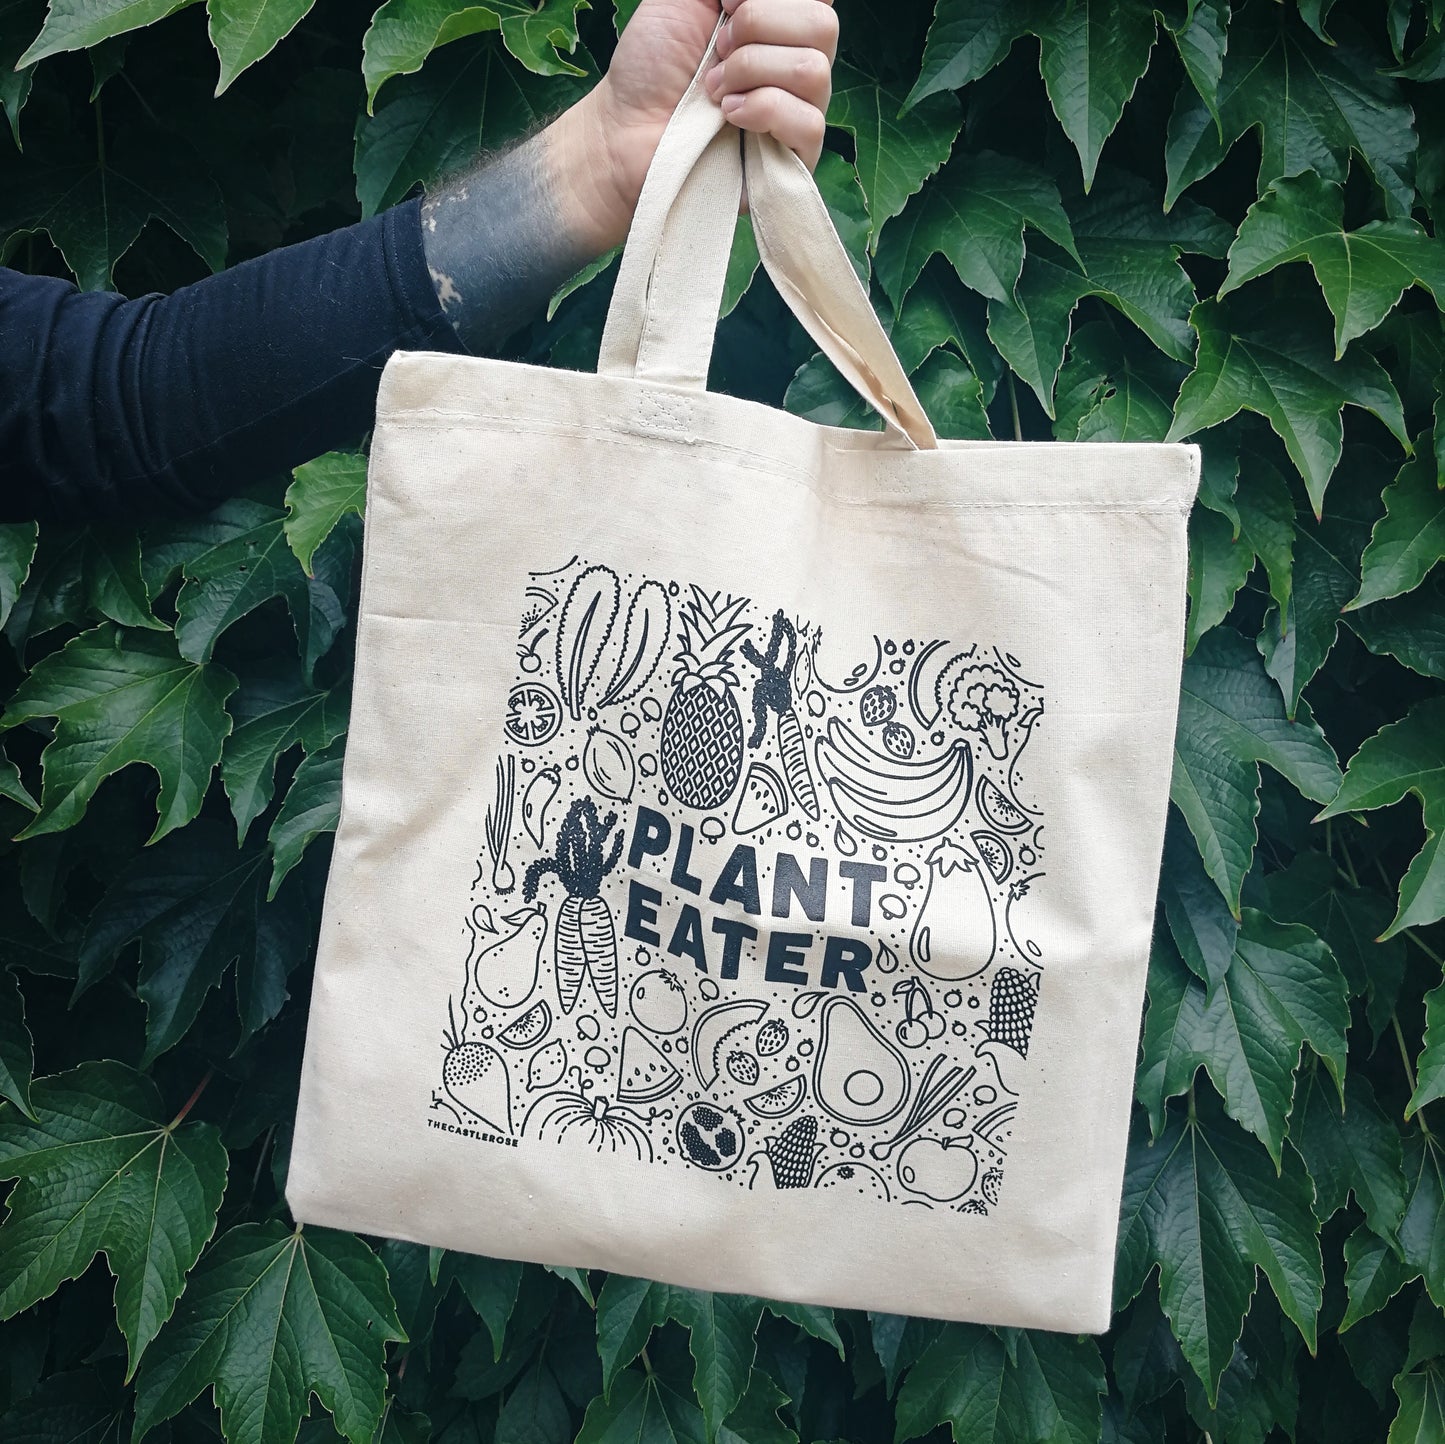 PLANT EATER Tote Bag